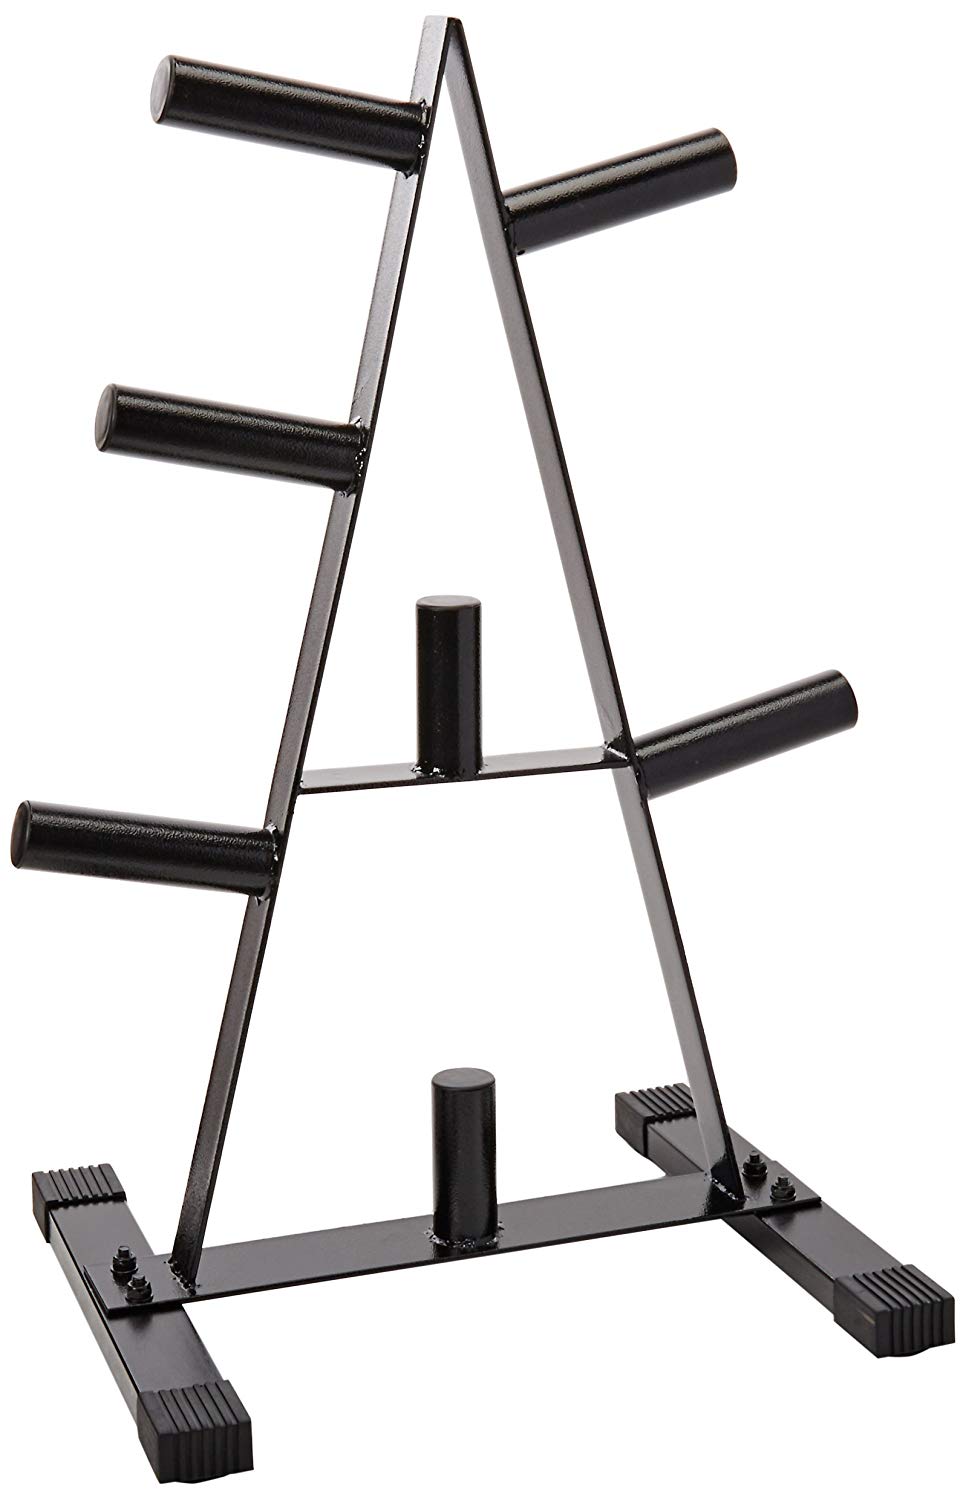 Details about   Weight Plate Rack Weight Plate Tree 2 inch For Bumper Plates Free Weight Stand* 